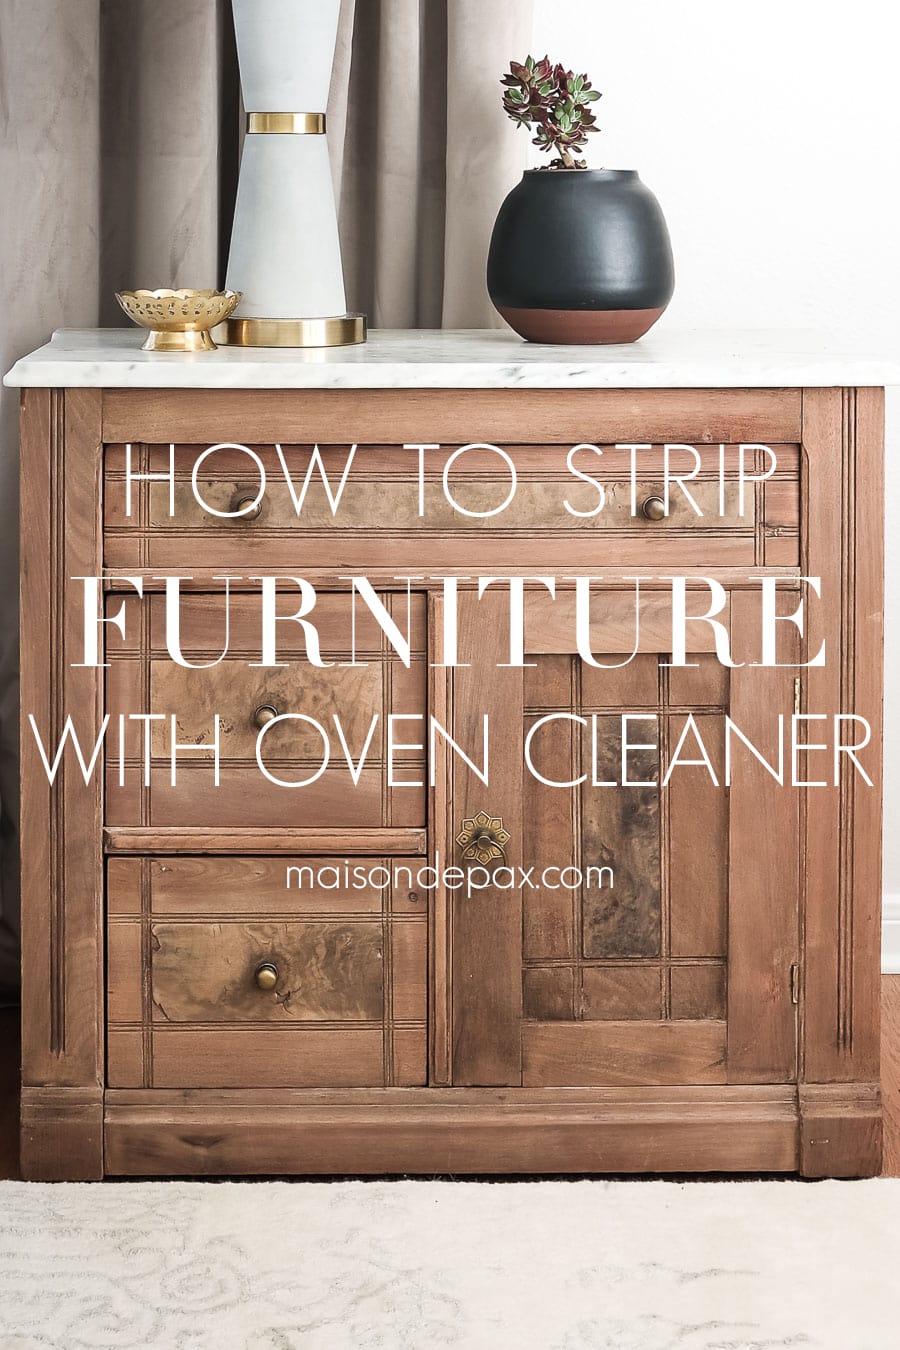 small dresser with text: how to strip furniture with oven cleaner